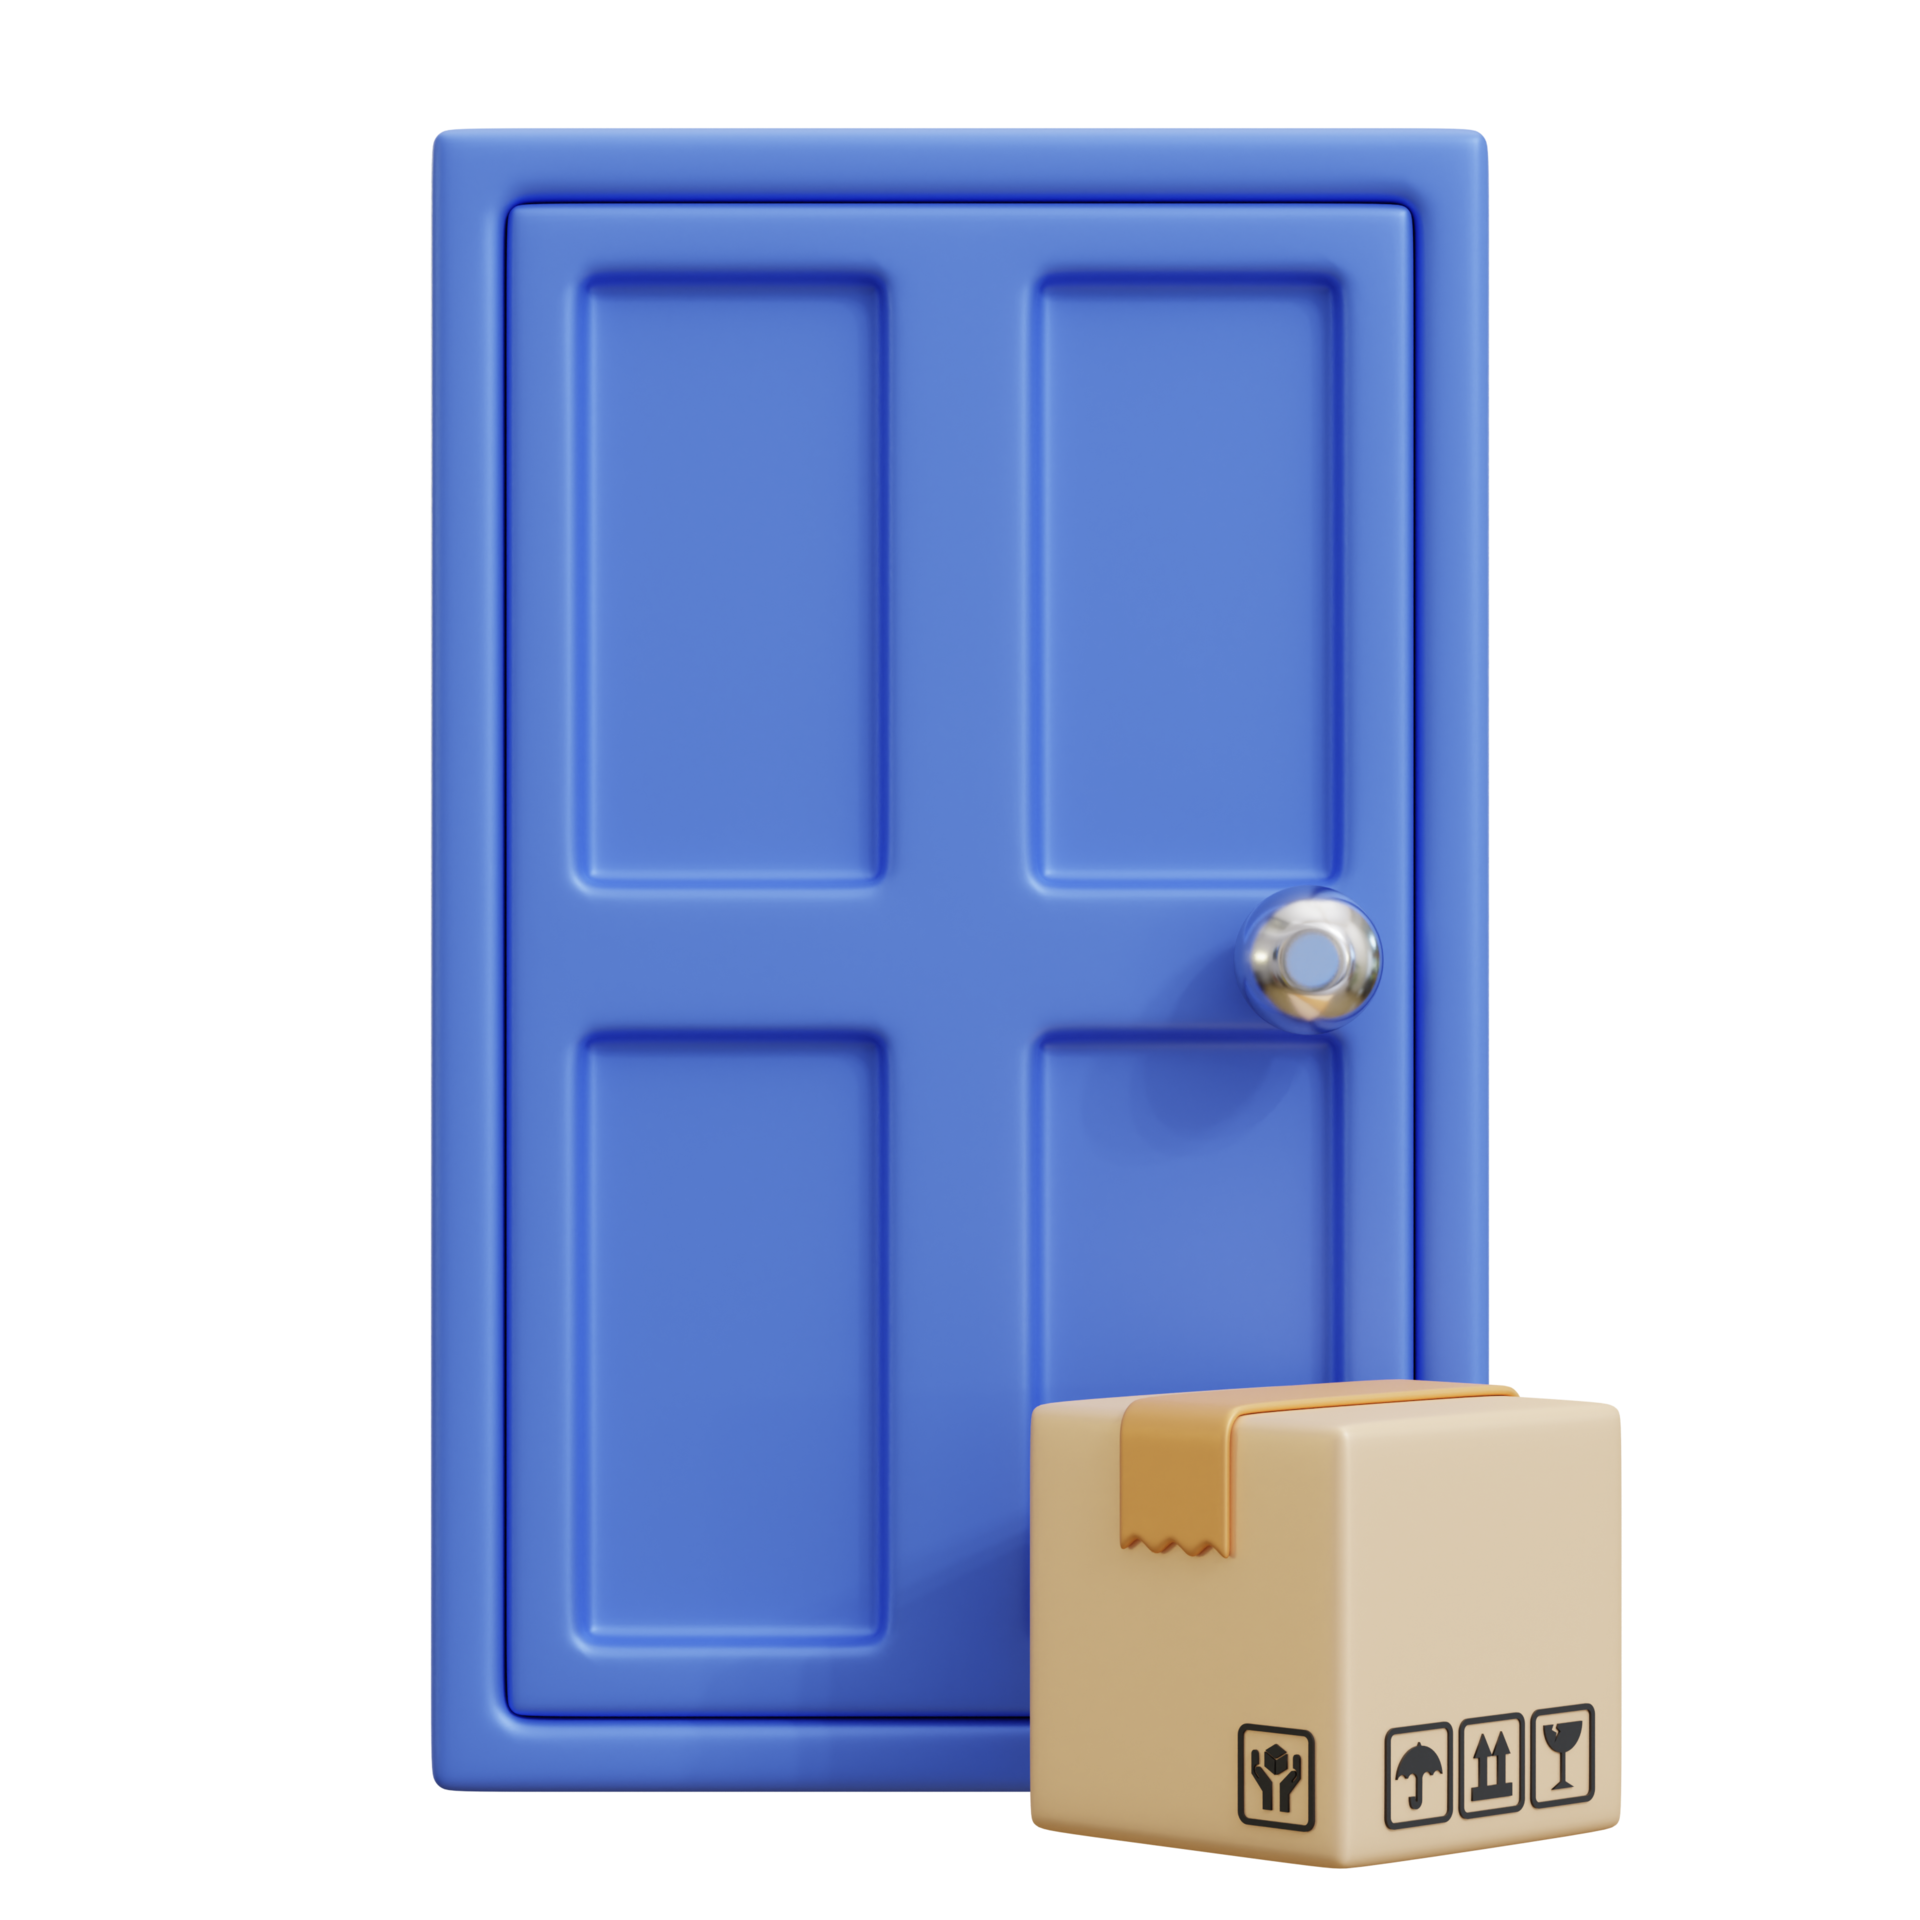 2,338 Package Delivery Doorstep Images, Stock Photos, 3D objects, & Vectors